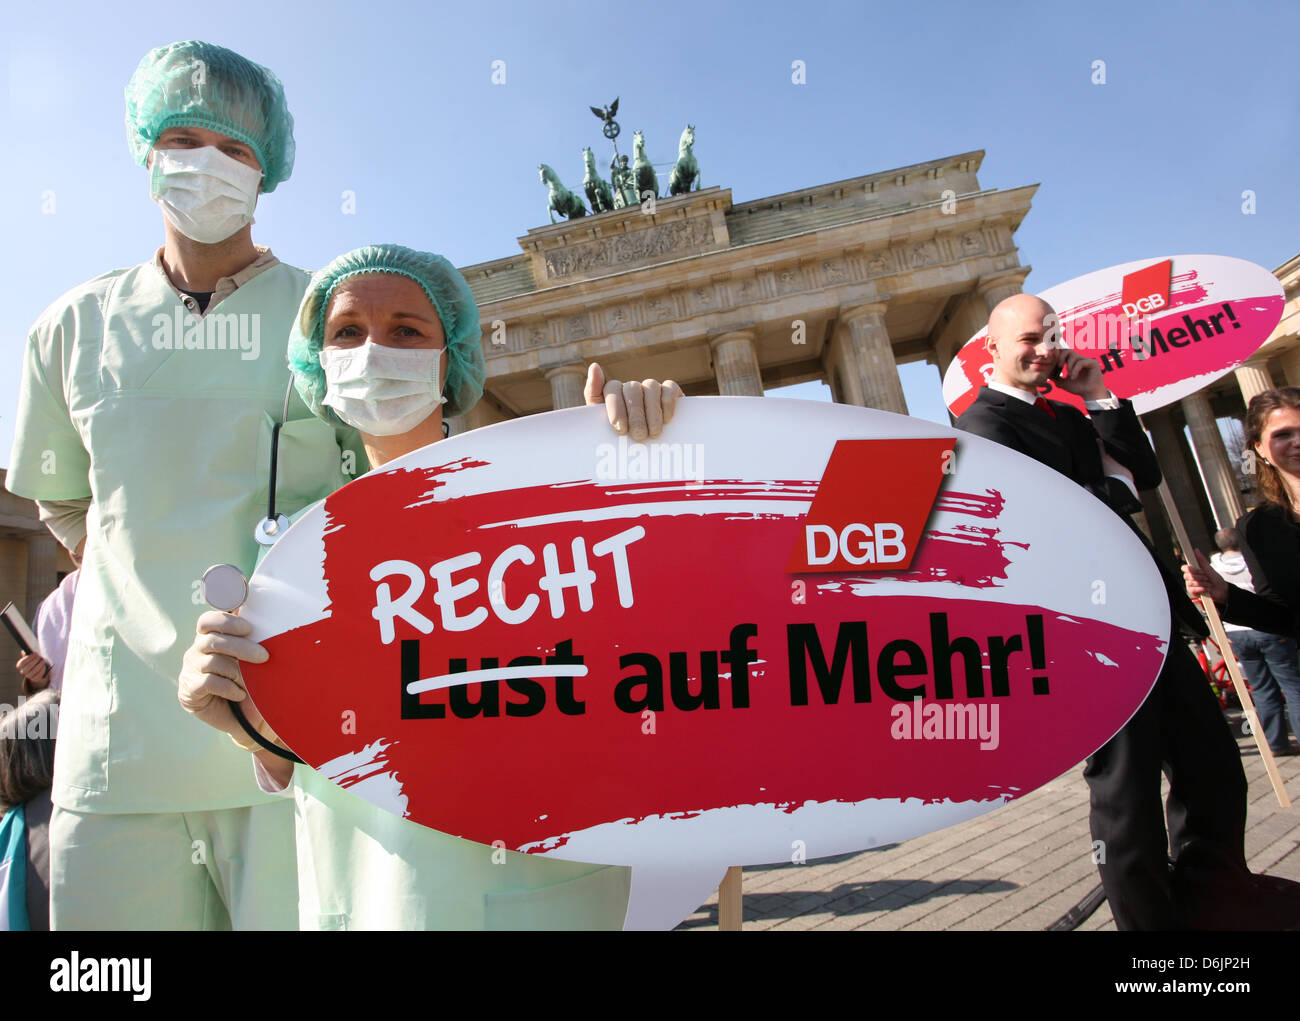 Two protesters dressed in medical gowns hold up a sign which reads 'Recht auf Mehr!' (Rights to more!) during the 'Equal Pay Day' rally in front of the Brandenburg Gate in Berlin, Germany, 23 March 2012. The rally took place on the occasion of the International Women's Day under the motto 'Recht statt billig - Entgeldgleichheit gesetzlich regeln' (Equal rights instead of cheap - fo Stock Photo